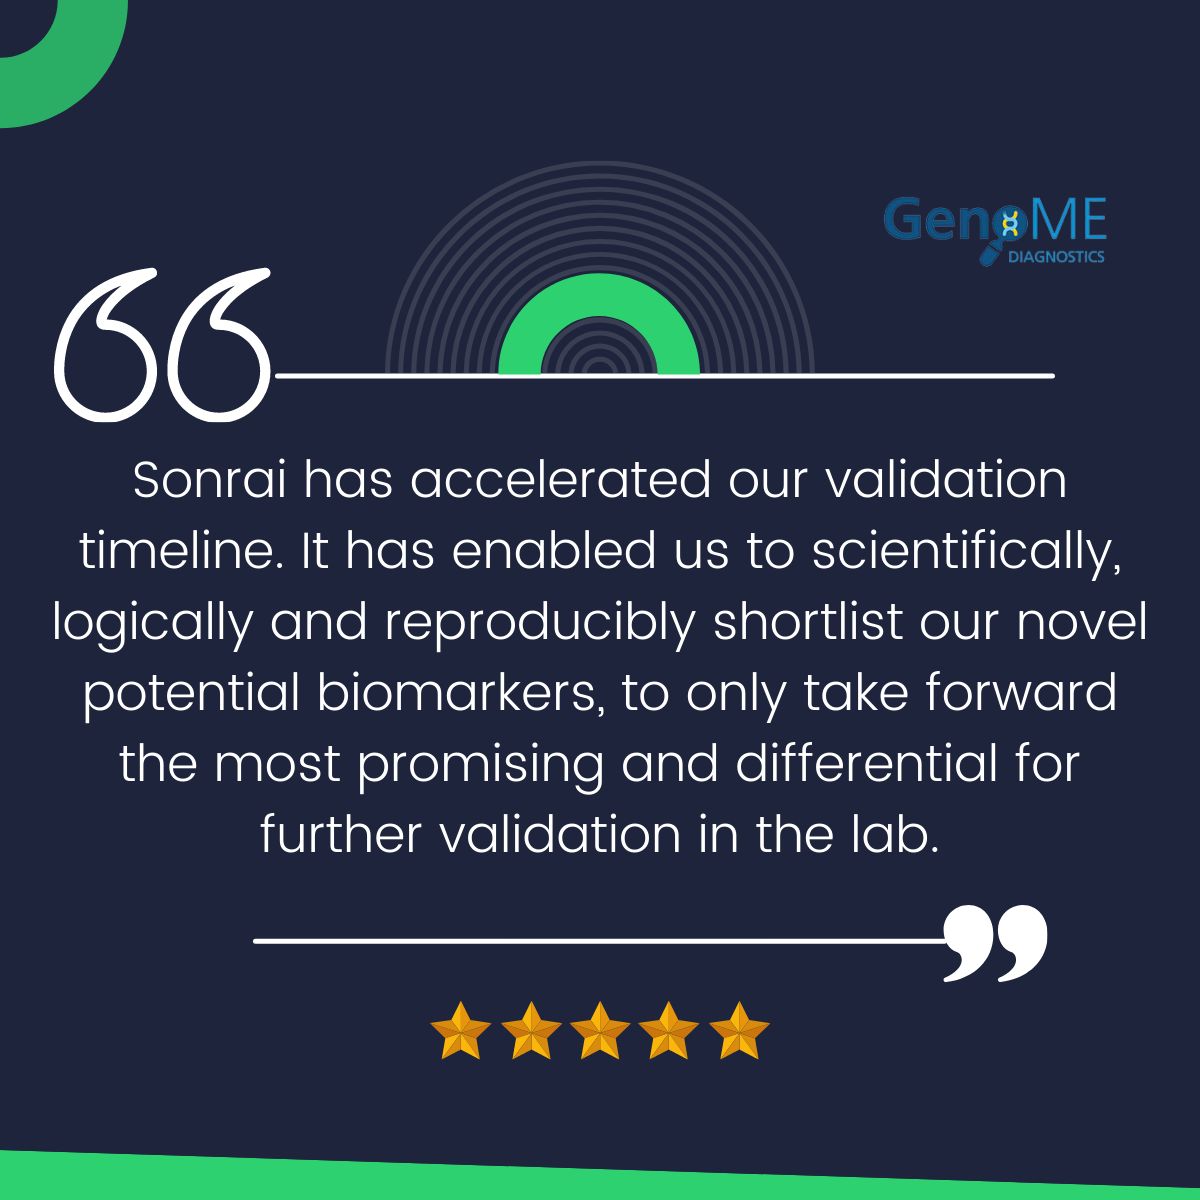 Another happy customer and some amazing feedback from @GenoME_Dx🙌 Imagine what you could discover with Sonrai. If you need to accelerate your ability to identify and validate new biomarkers - we're here to help! 👉bit.ly/Meet_DrAlderdi… #biomarkerdiscovery